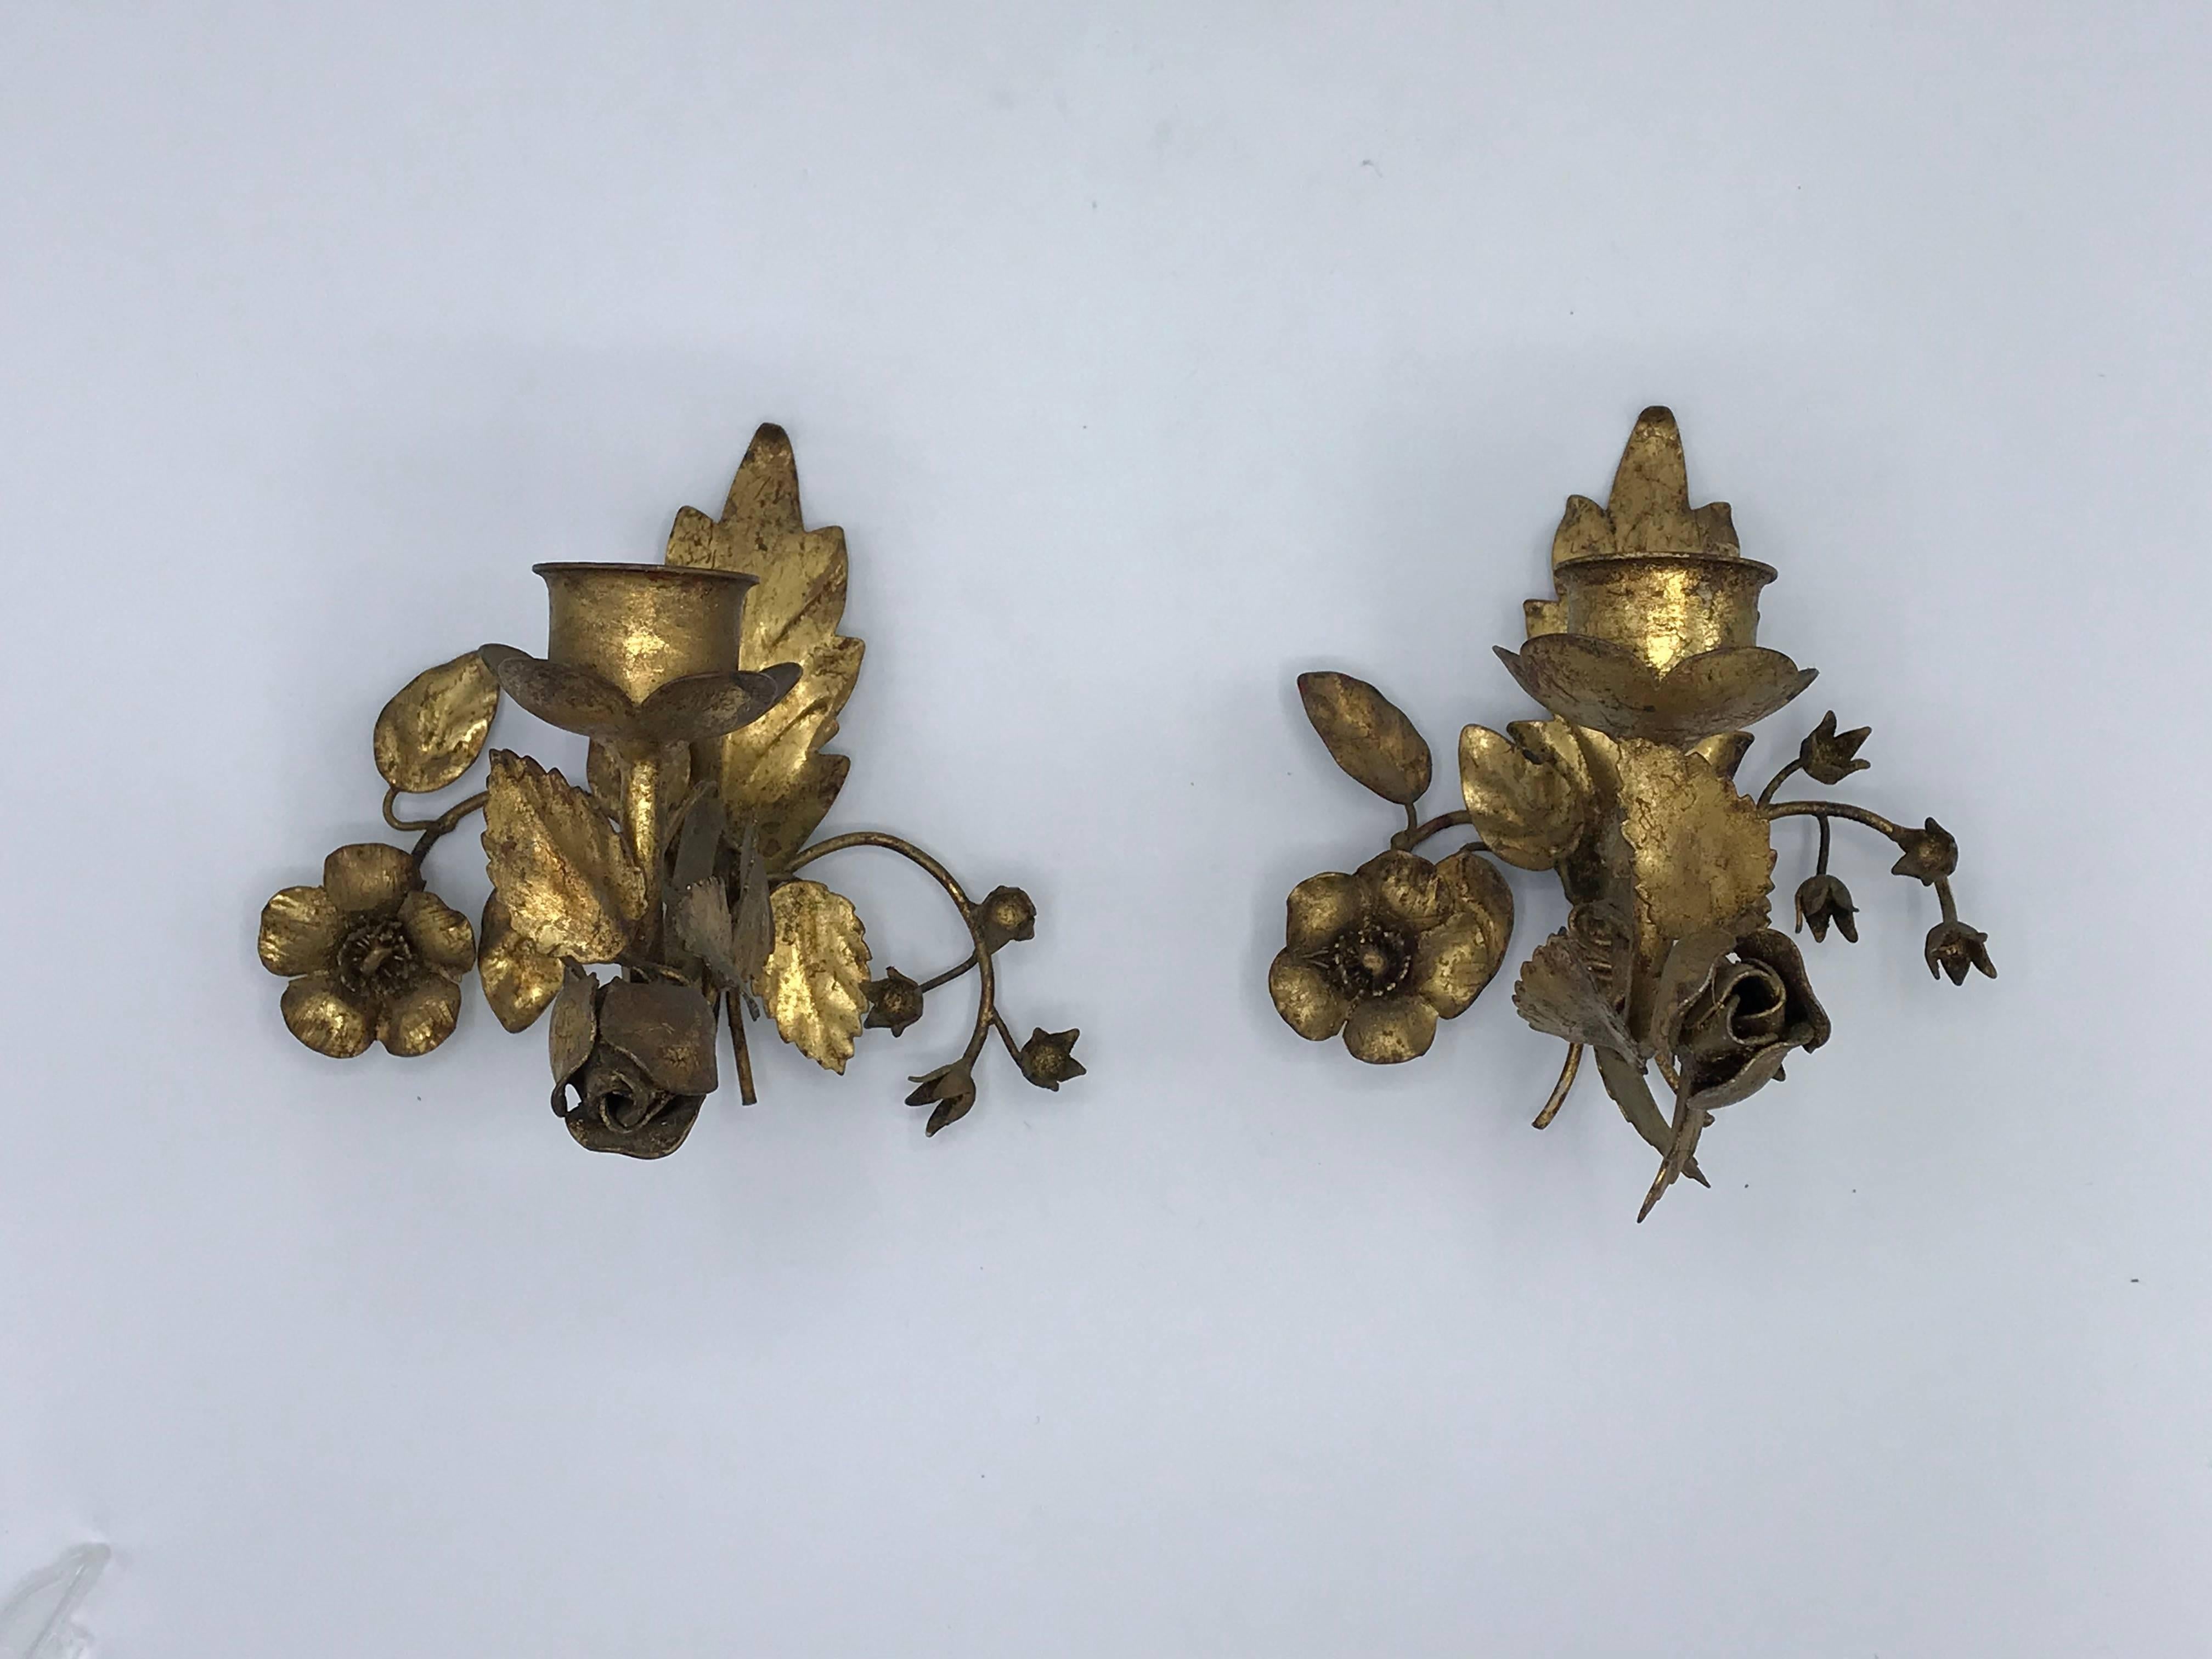 Offered is an exquisite, pair of 1960s Italian Florentine gilt wall sconces. The pair have a mirrored rose, vine, and floral sculpture motif. Hollowed inside, allowing for the pair to convert to electric sconces vs candlestick.